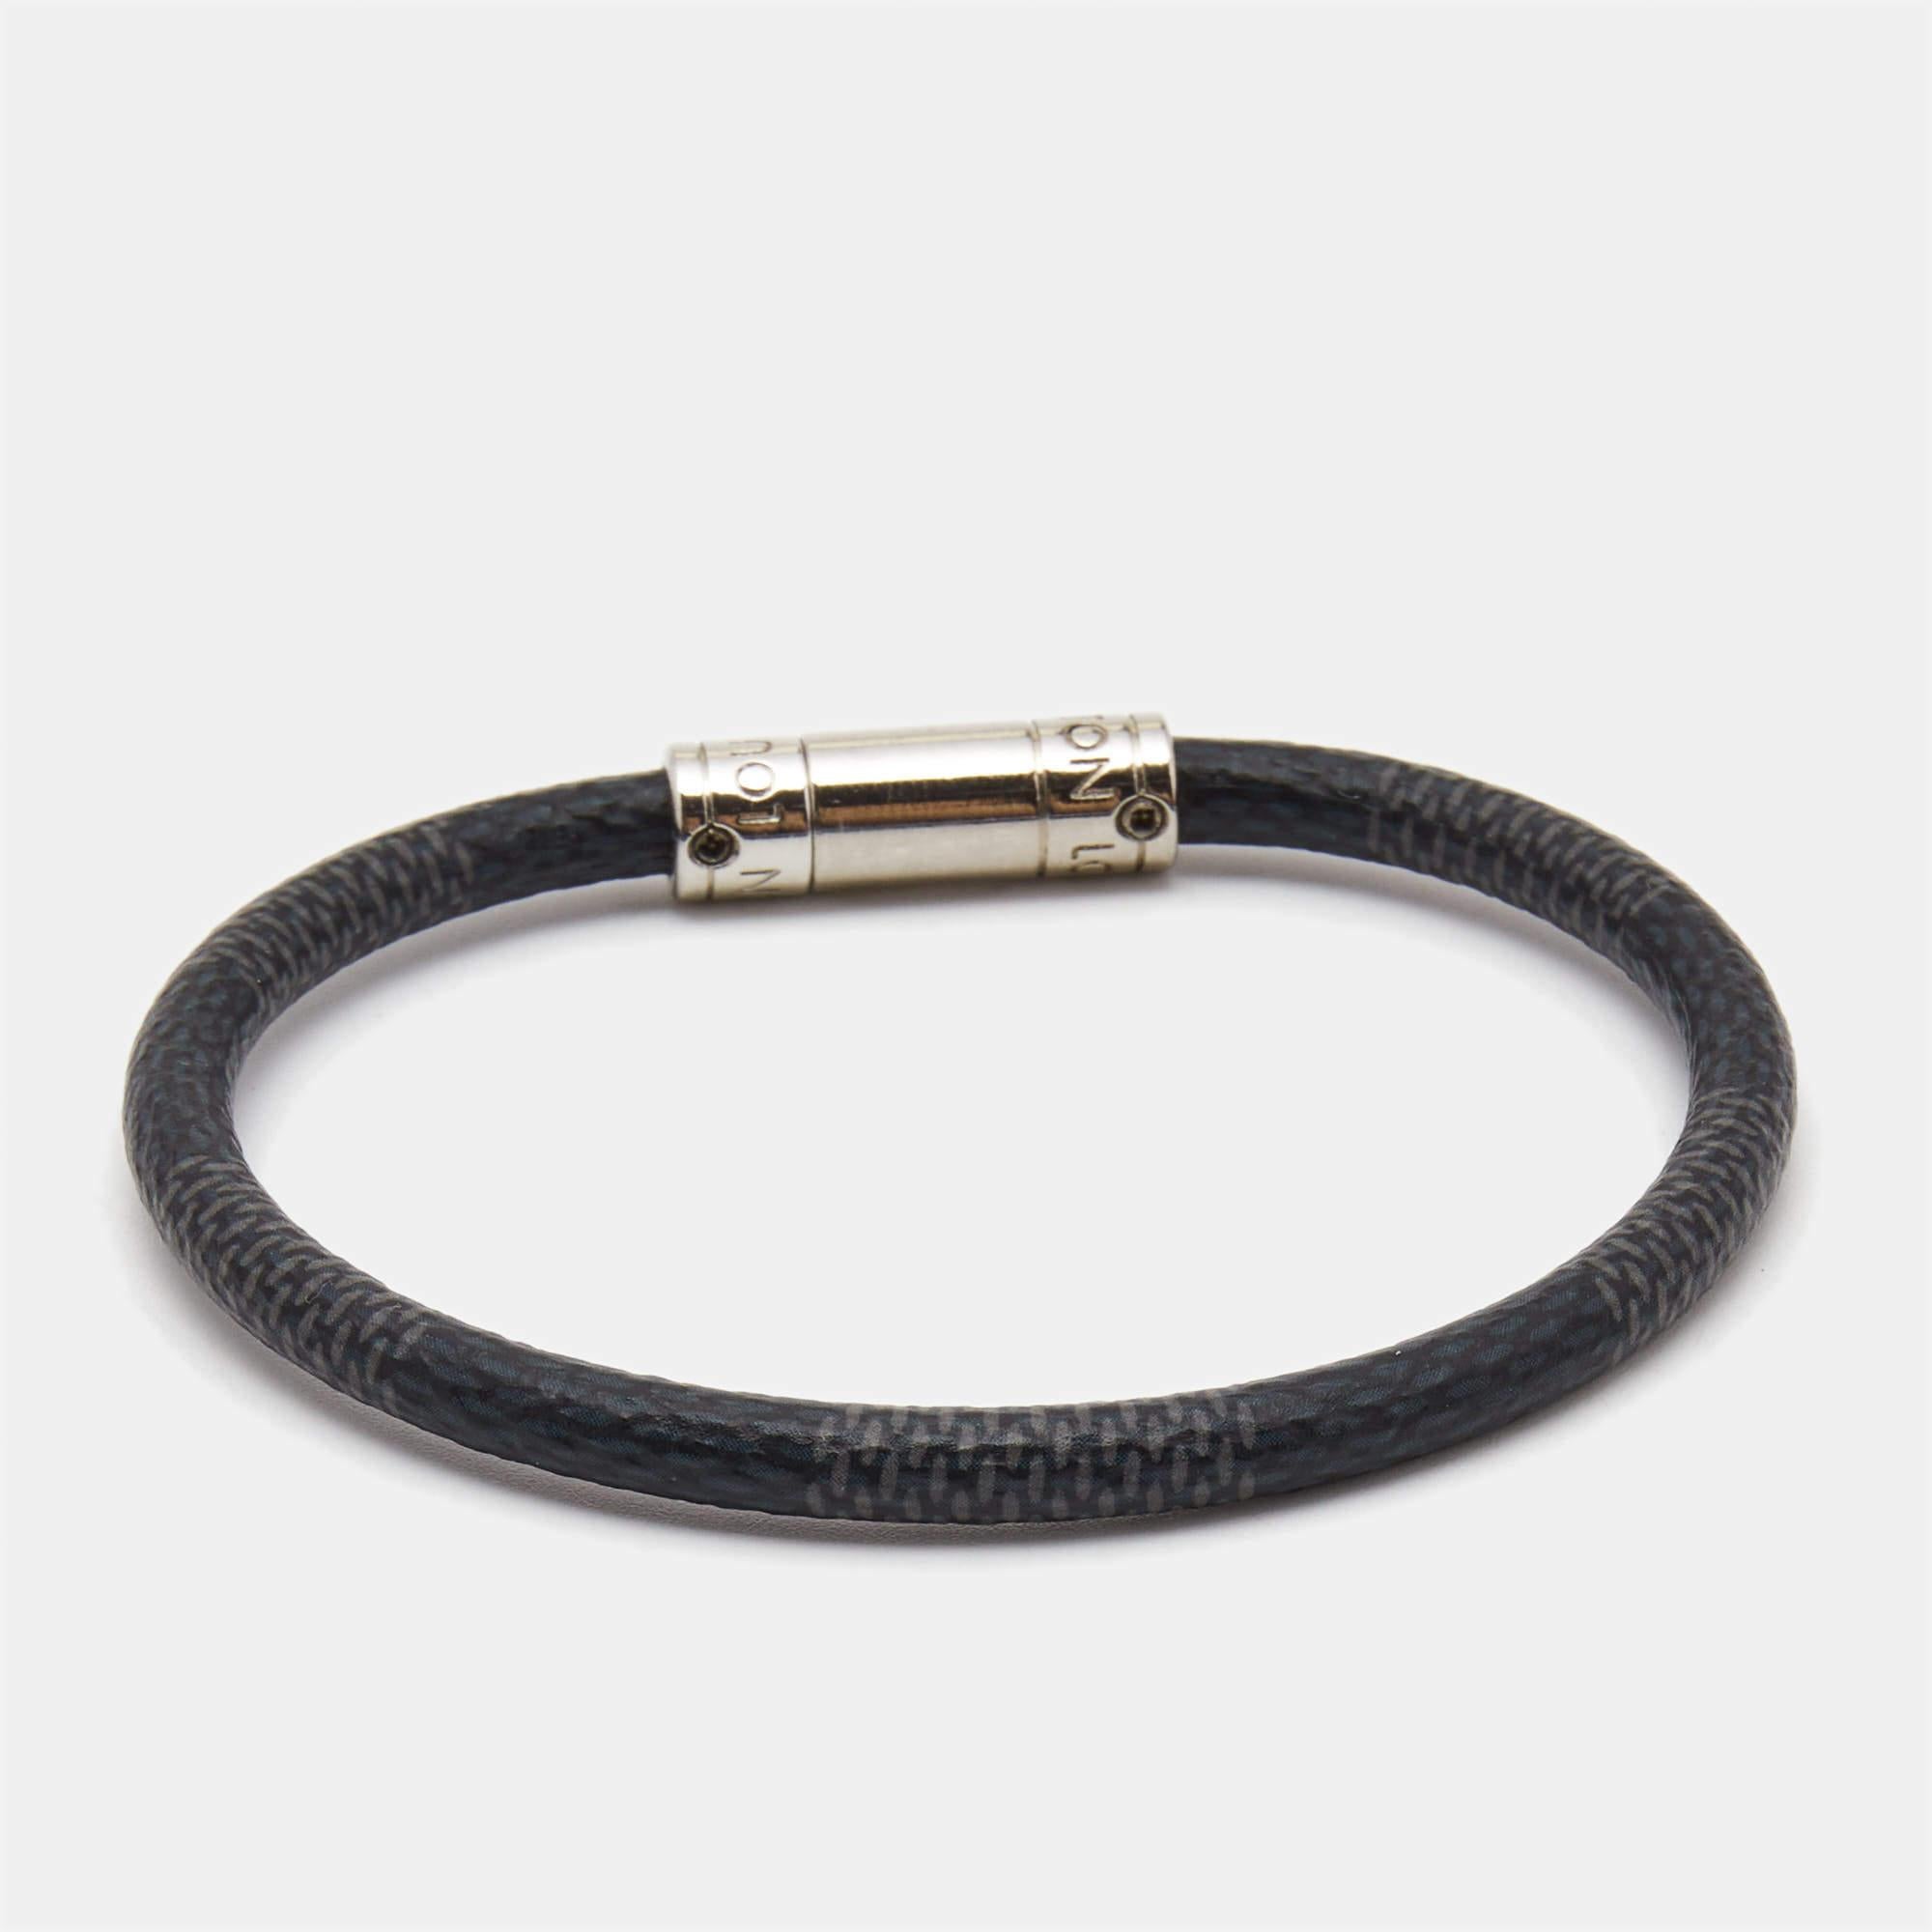 The iconic Keep It bracelet in historic Damier Ebene canvas is the perfect elegant accessory. The Louis Vuitton-engraved silver-tone lock is easy to open and close. Wear it every day and flaunt your fashion-forward choices.

Includes: Original